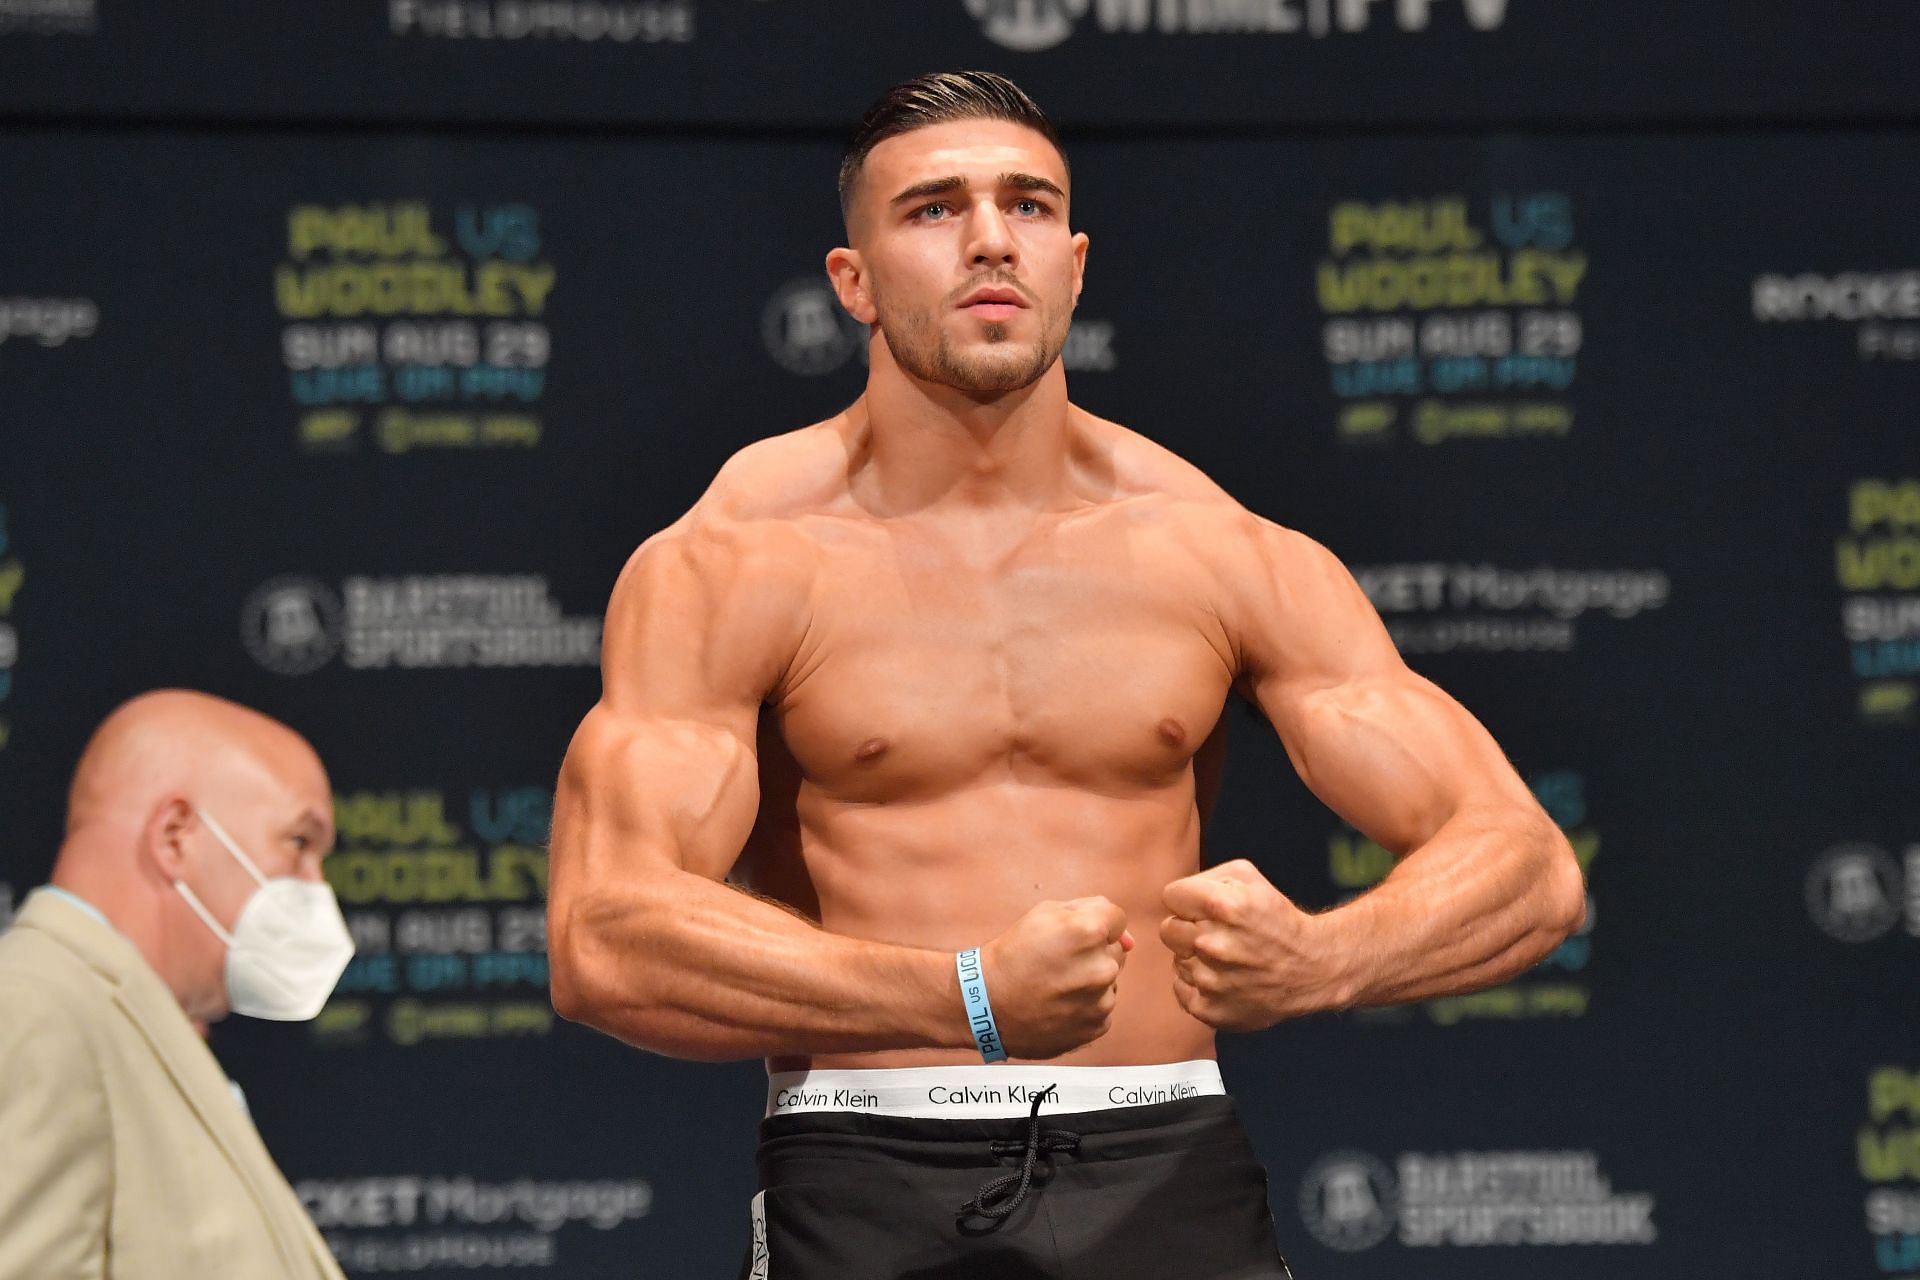 Tommy Fury at the Jake Paul Vs Tyron Woodley Weigh In